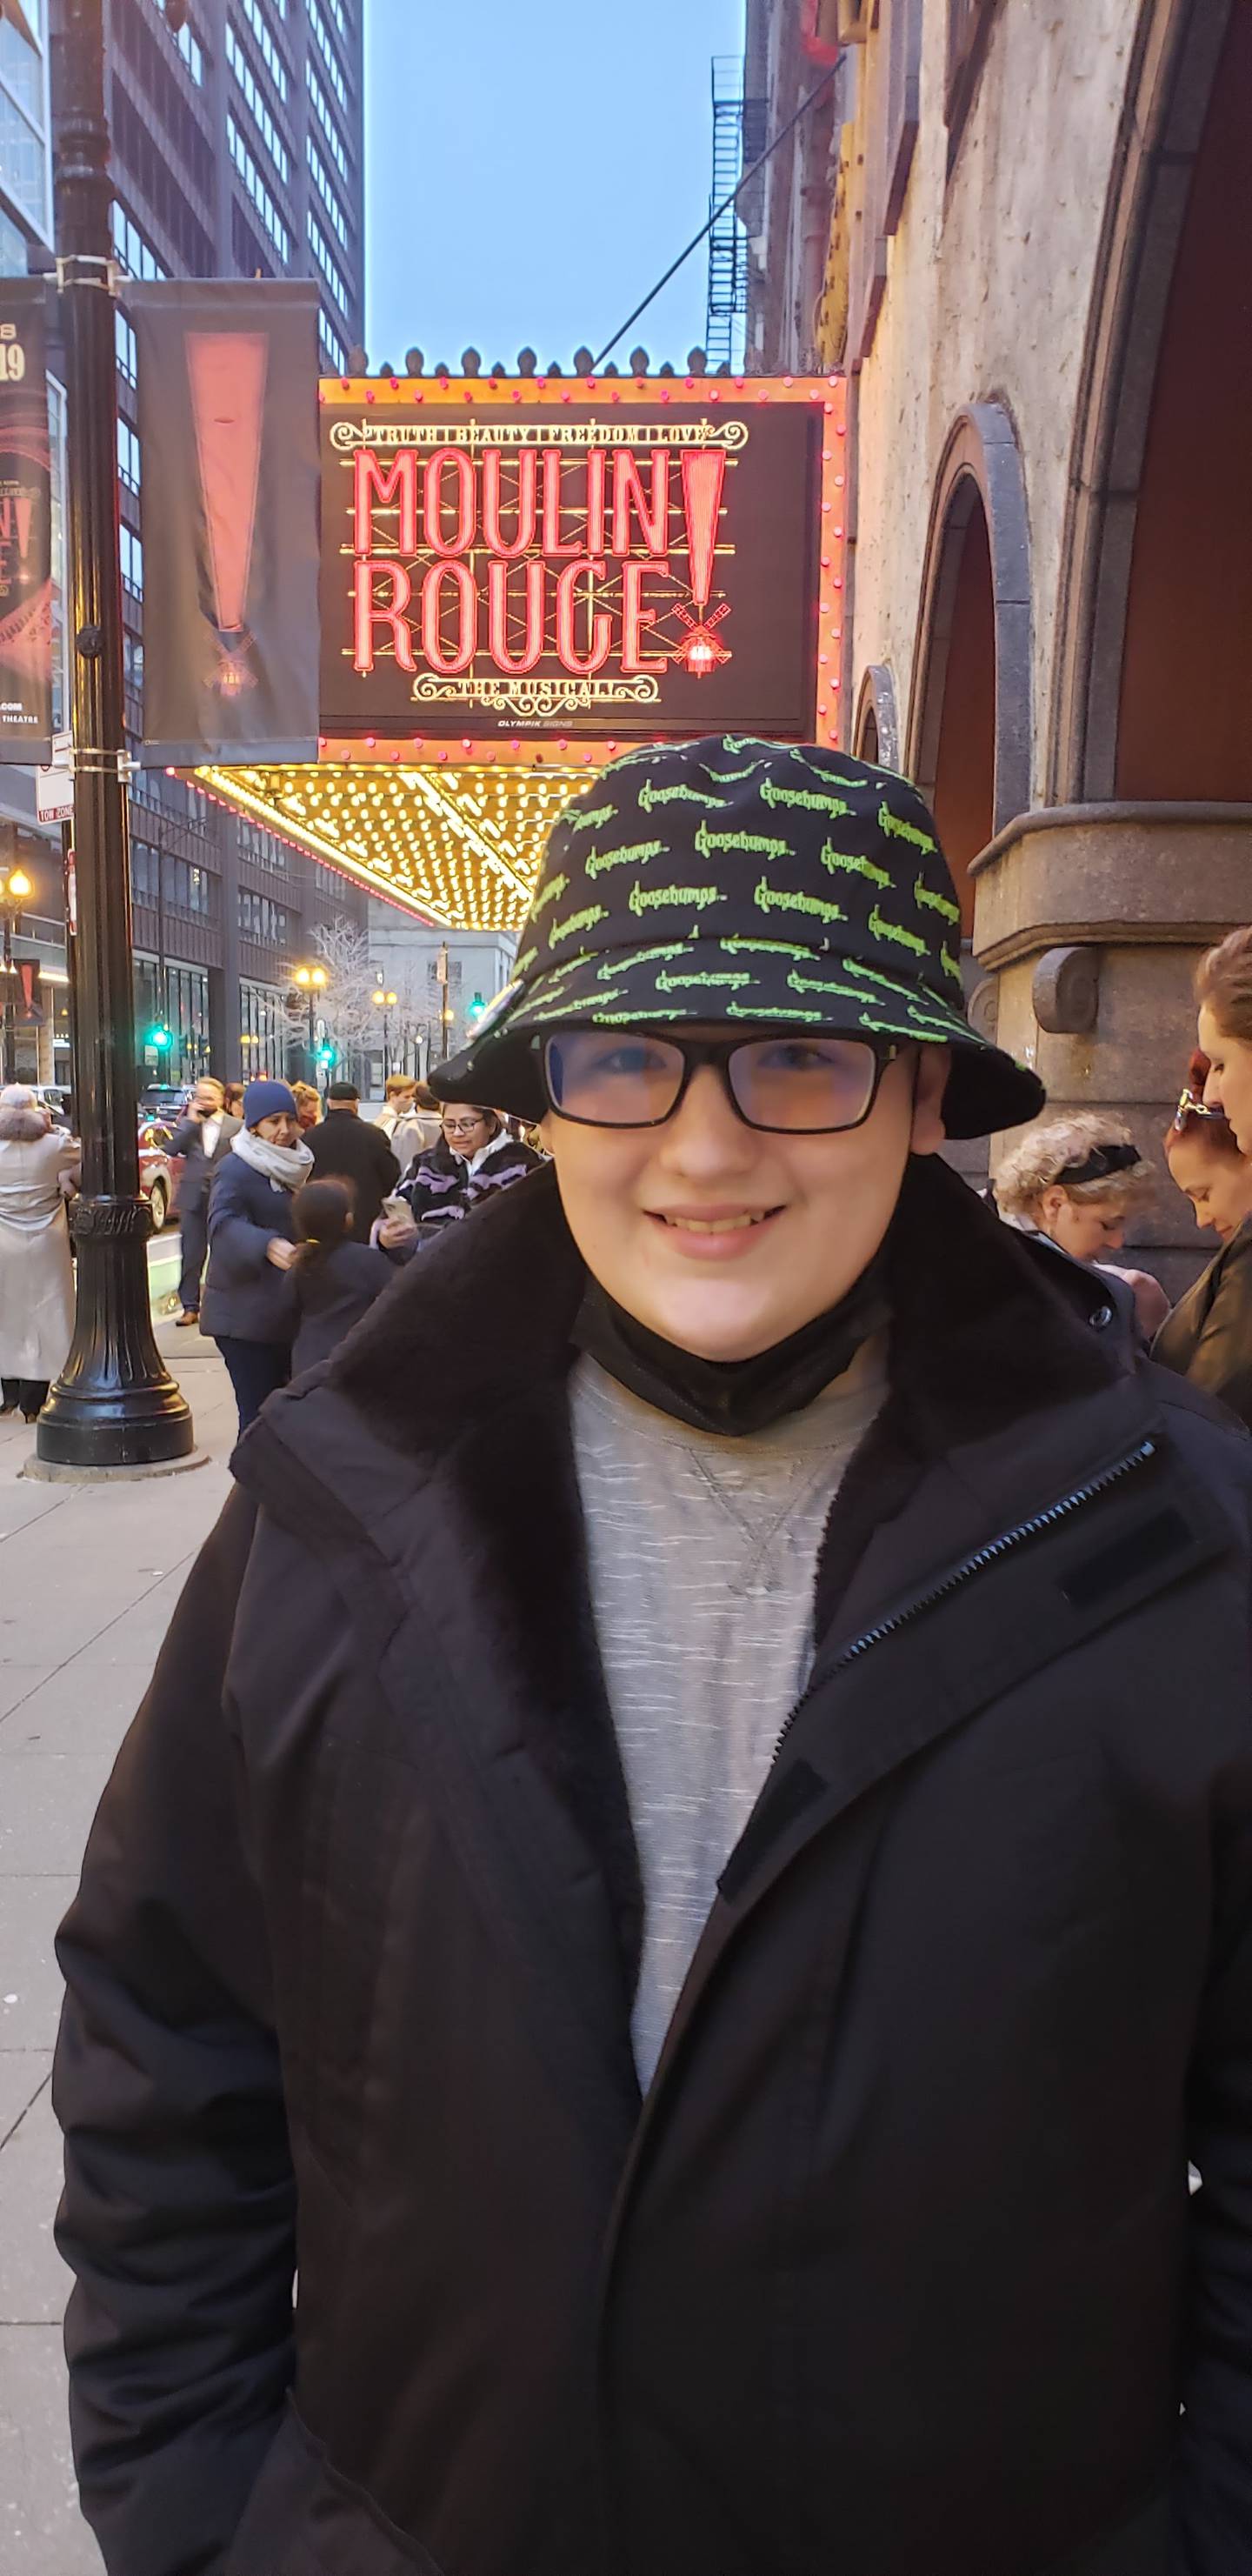 Vinnie Gincauskas, 15, of Lockport, has a rare soft tissue cancer called desmoplastic small round cell tumors or DSRCT. The cancer is aggressive but so is his treatment. “Benefit for Vinnie's Voyage” will be held from 4 to 11 p.m. Friday, June 10, 2022, at the Lockport American Legion